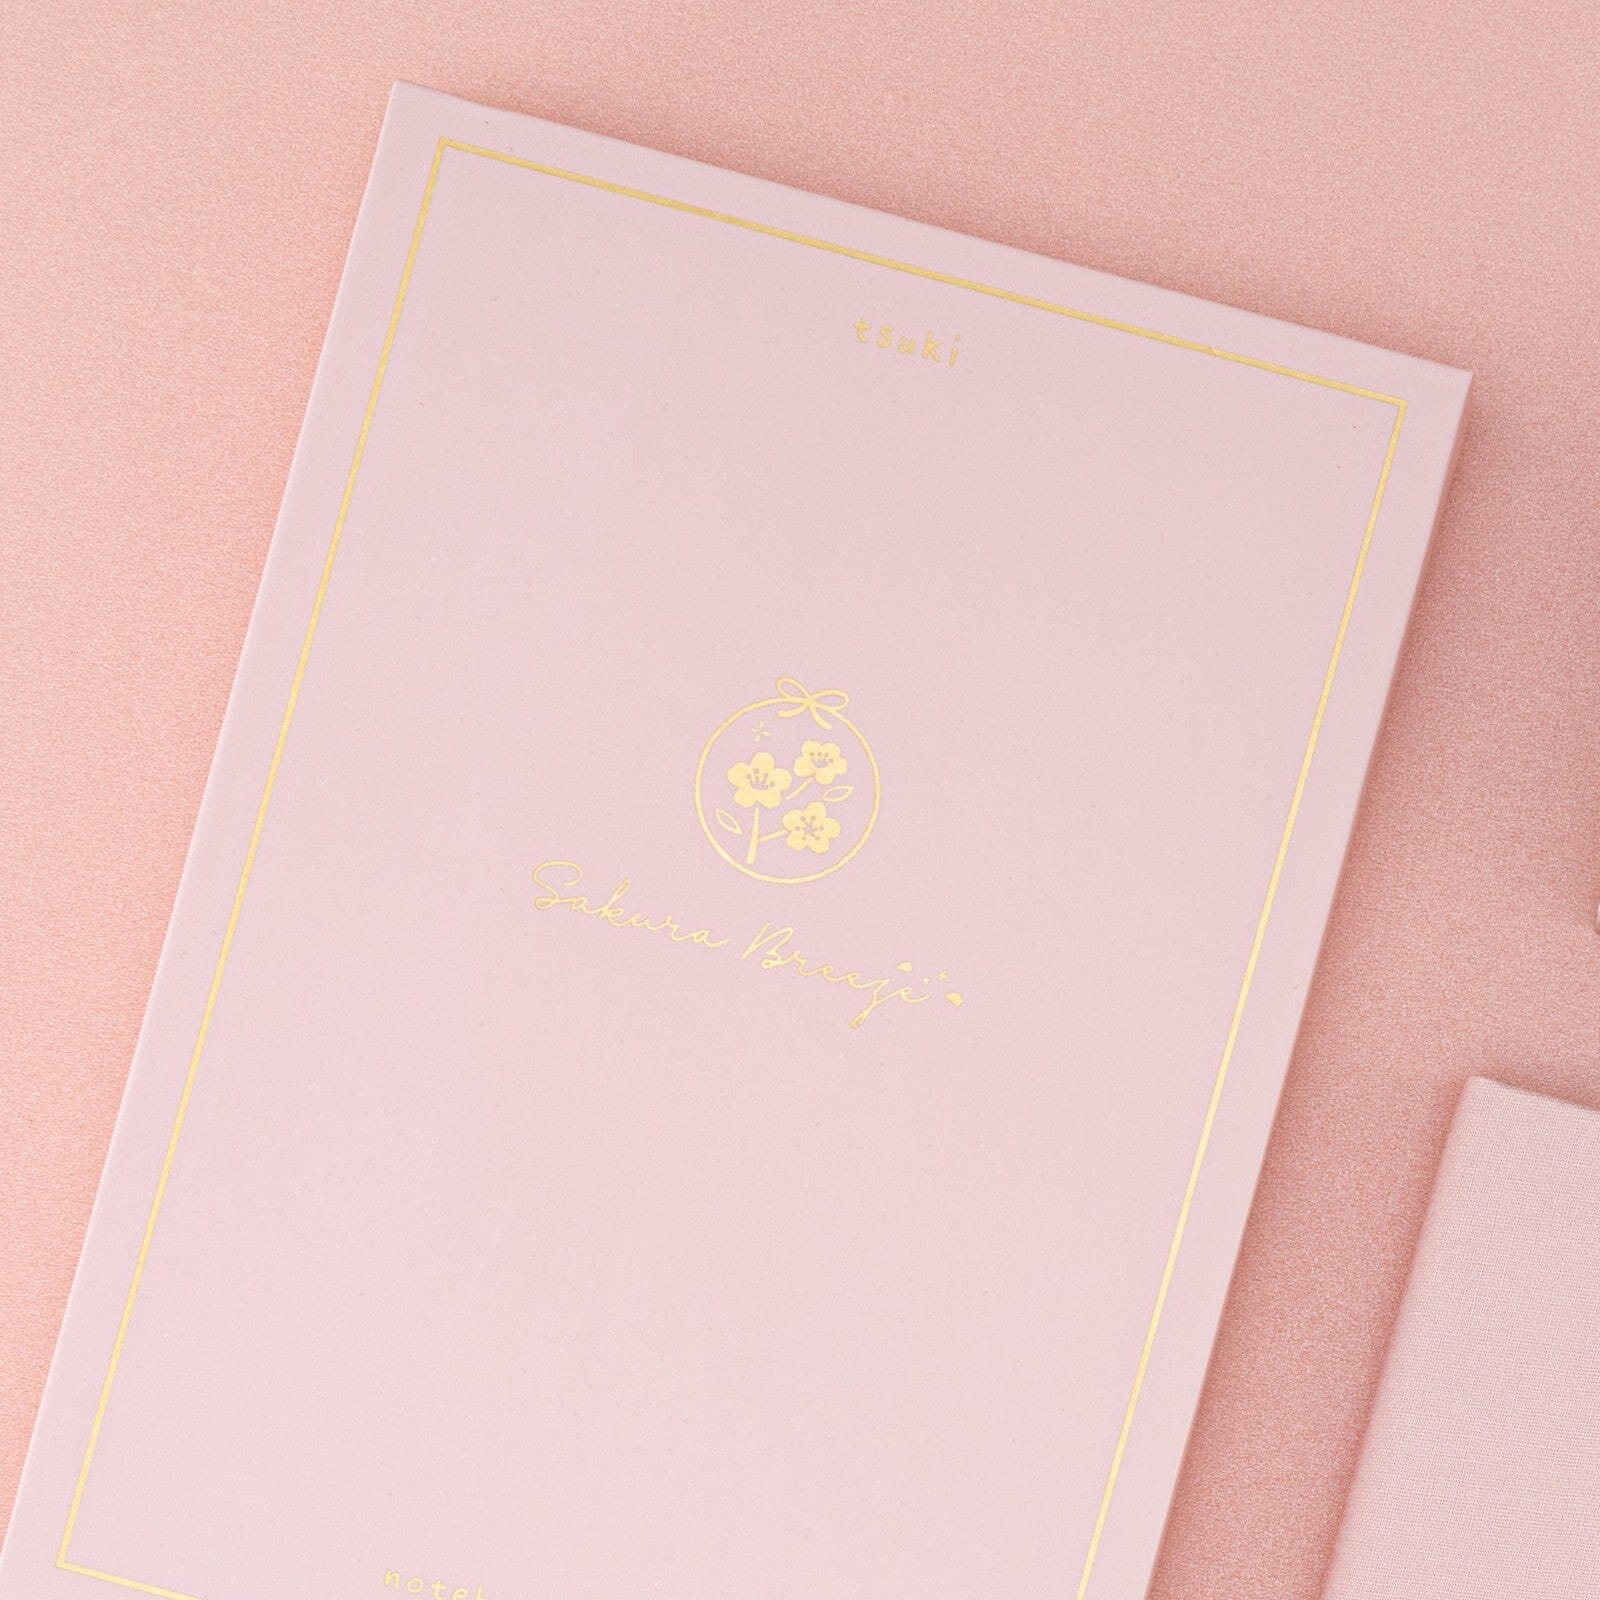 Tsuki Sakura Breeze limited edition bullet journal by Notebook Therapy close up of box detail